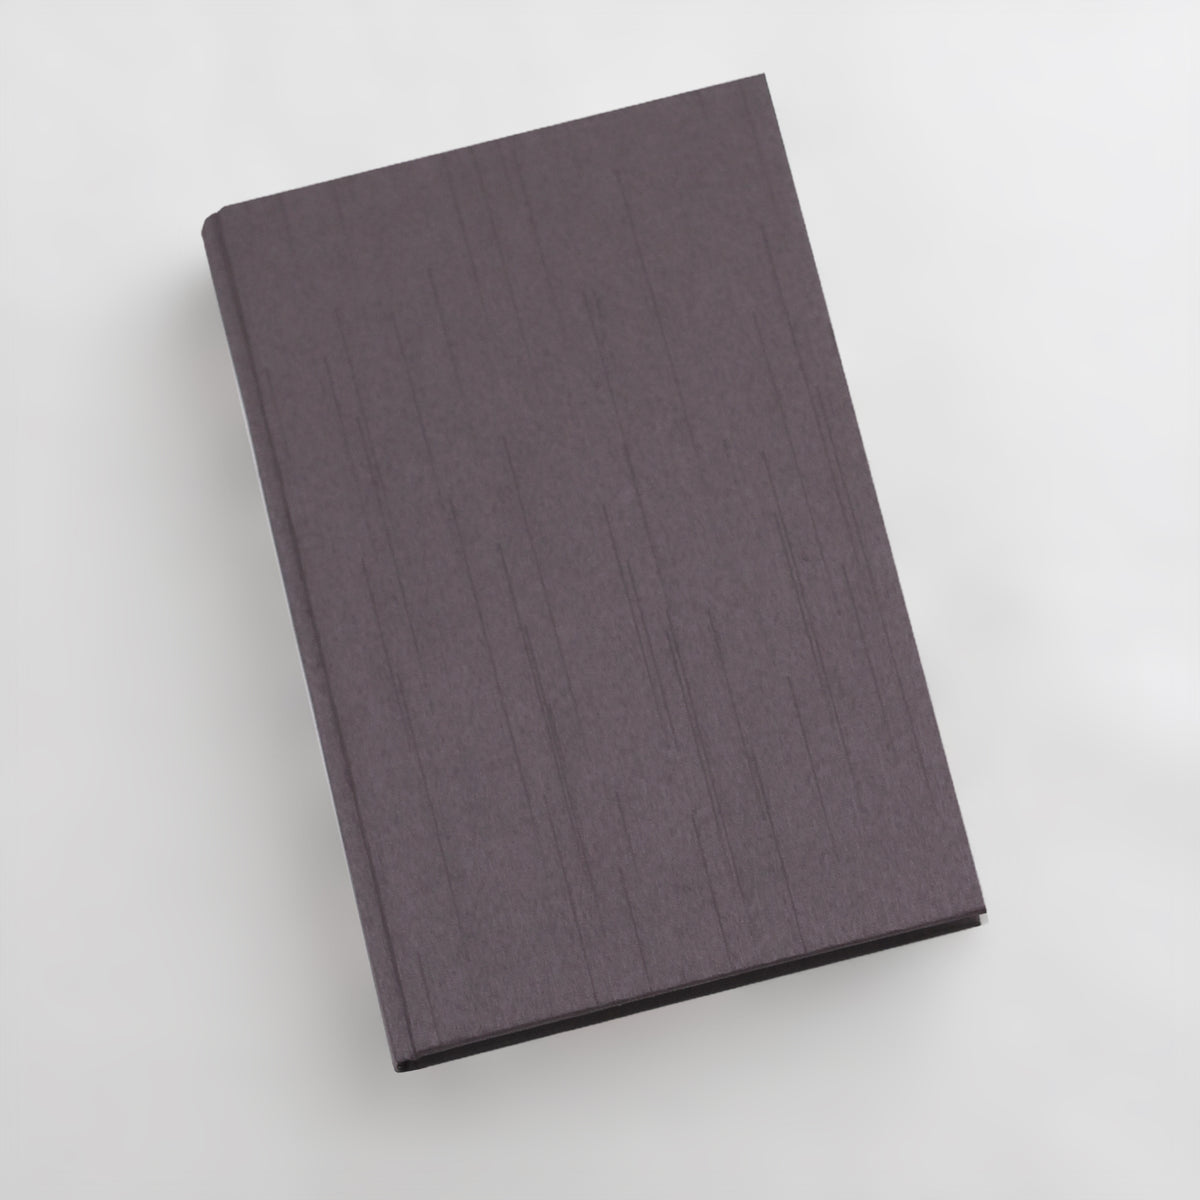 Medium 5.5x8.5 Blank Page Journal | Cover: Amethyst Silk | Available Personalized